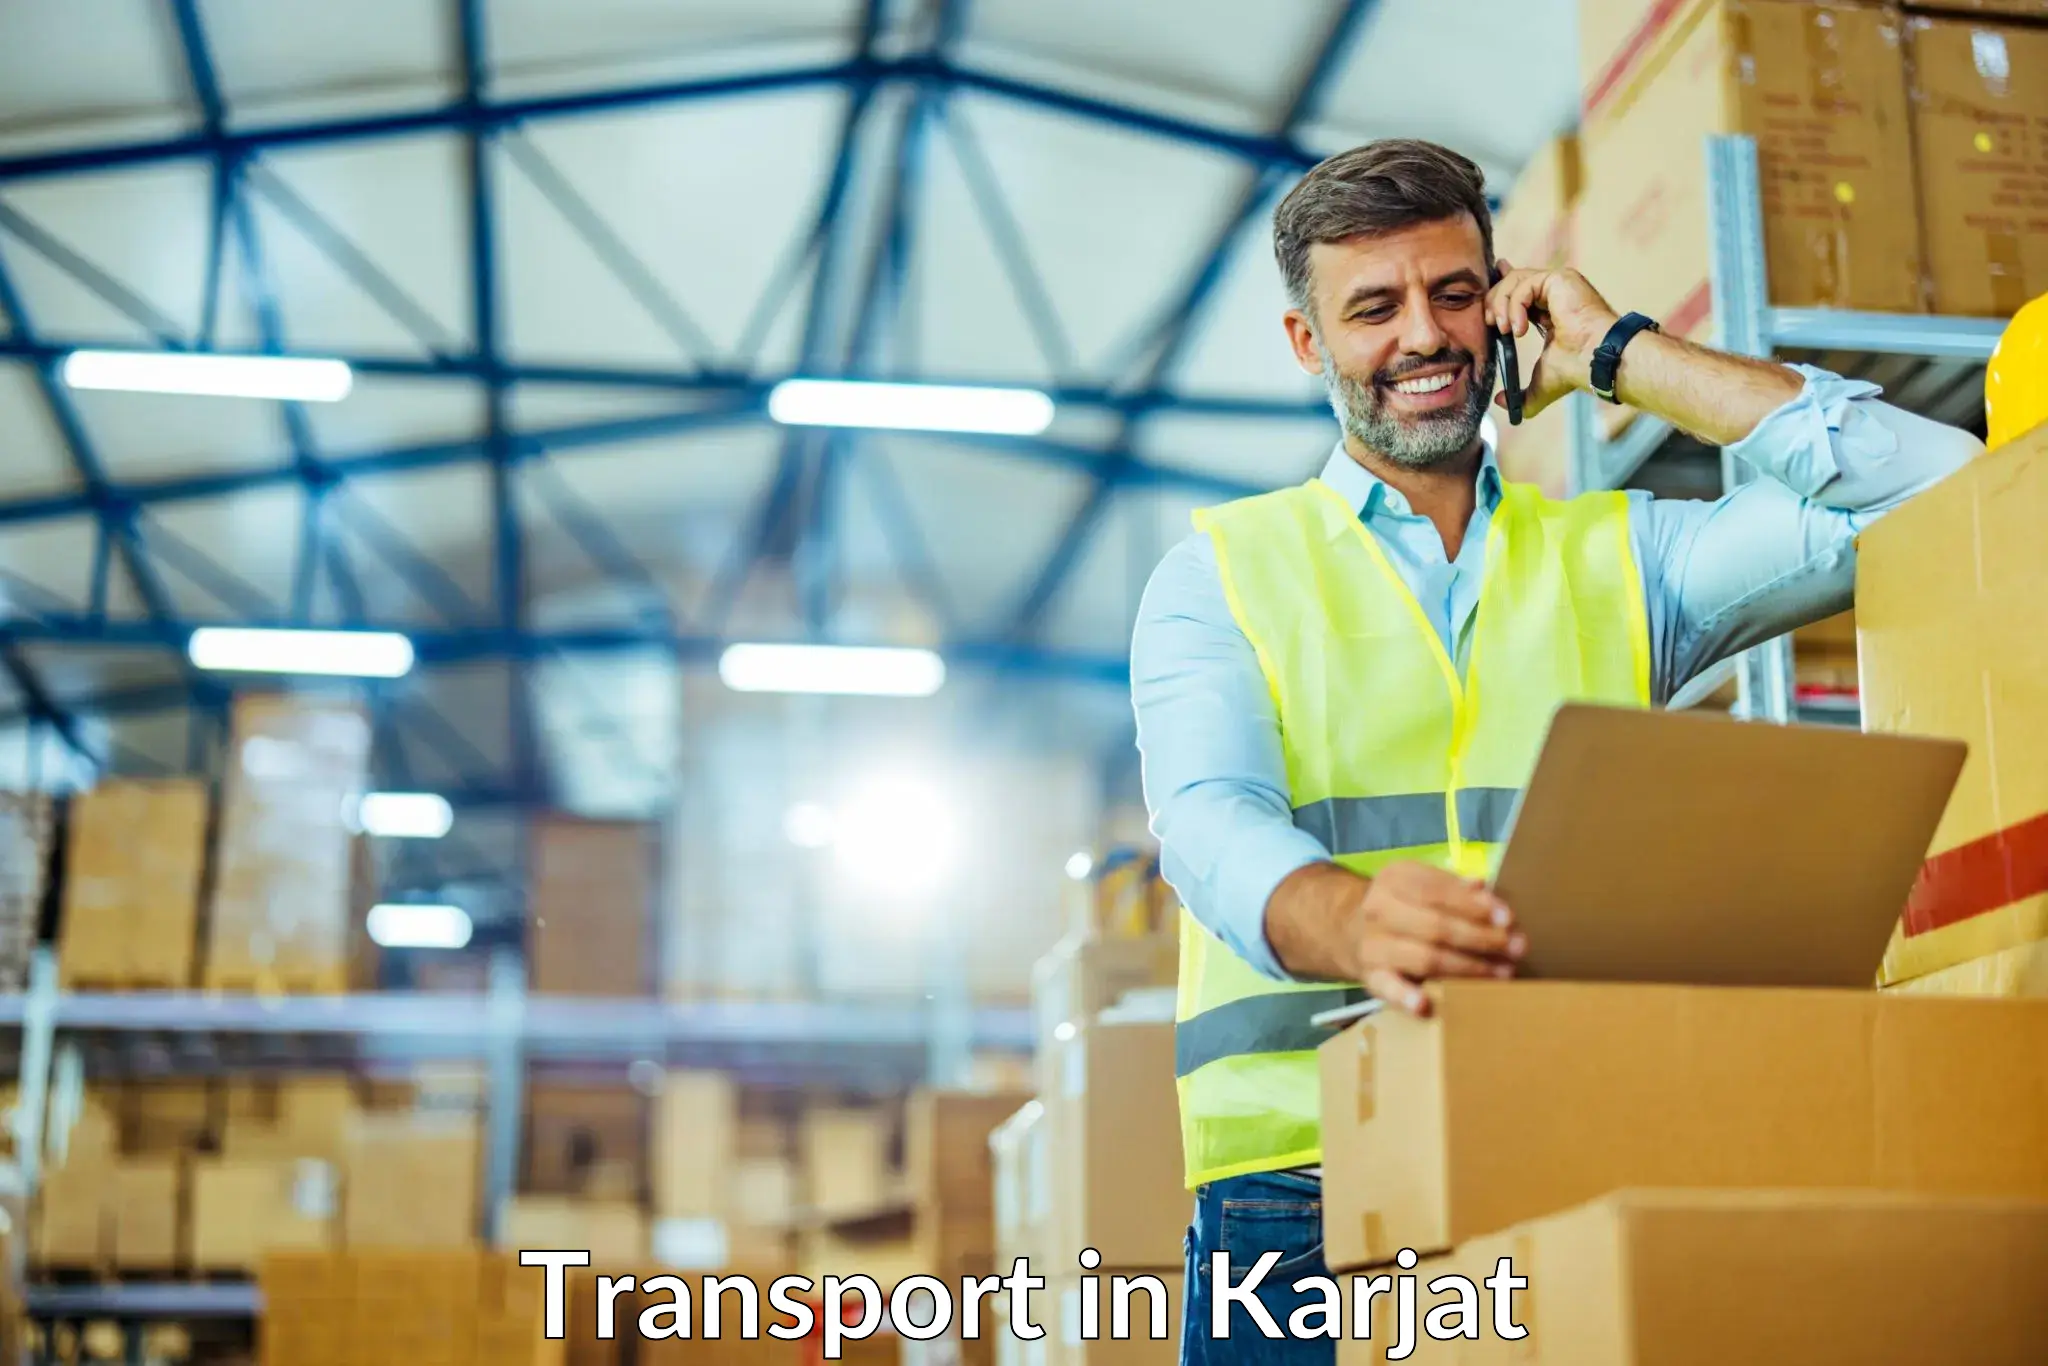 Luggage transport services in Karjat